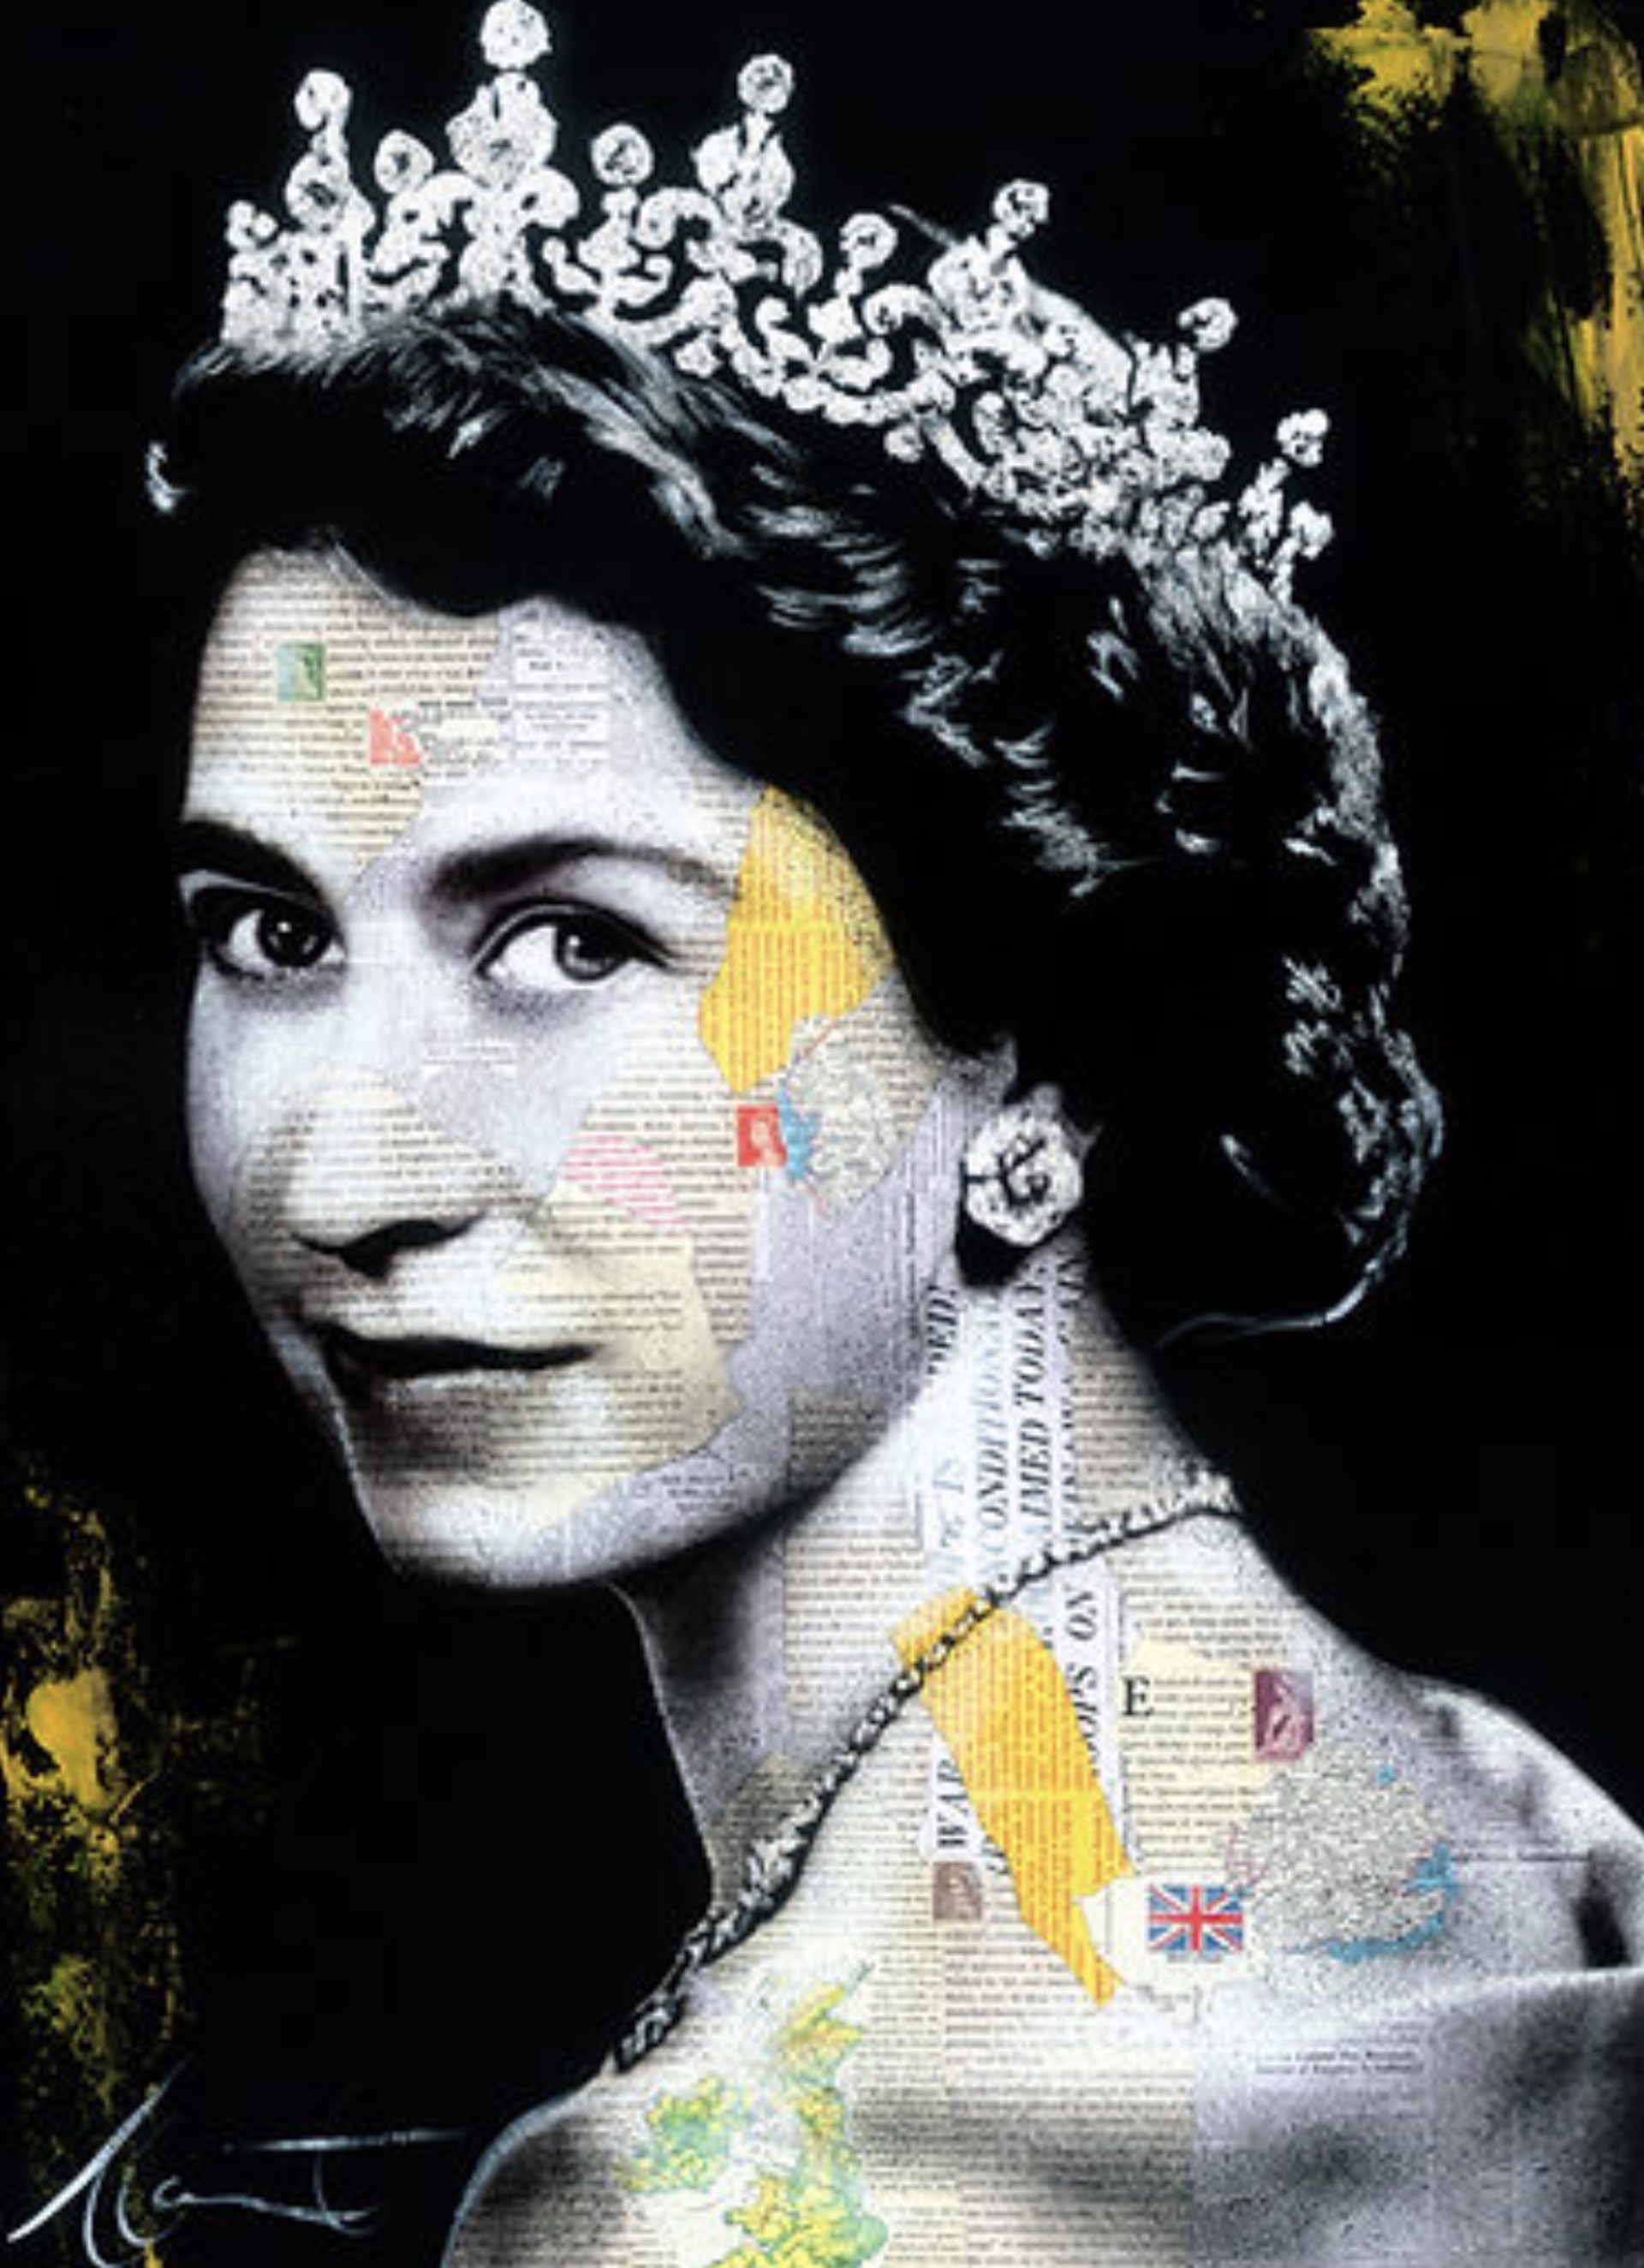 God Save the Queen-Edition of 15 -Similar Painted Originals can be Commissioned by Andre Monet